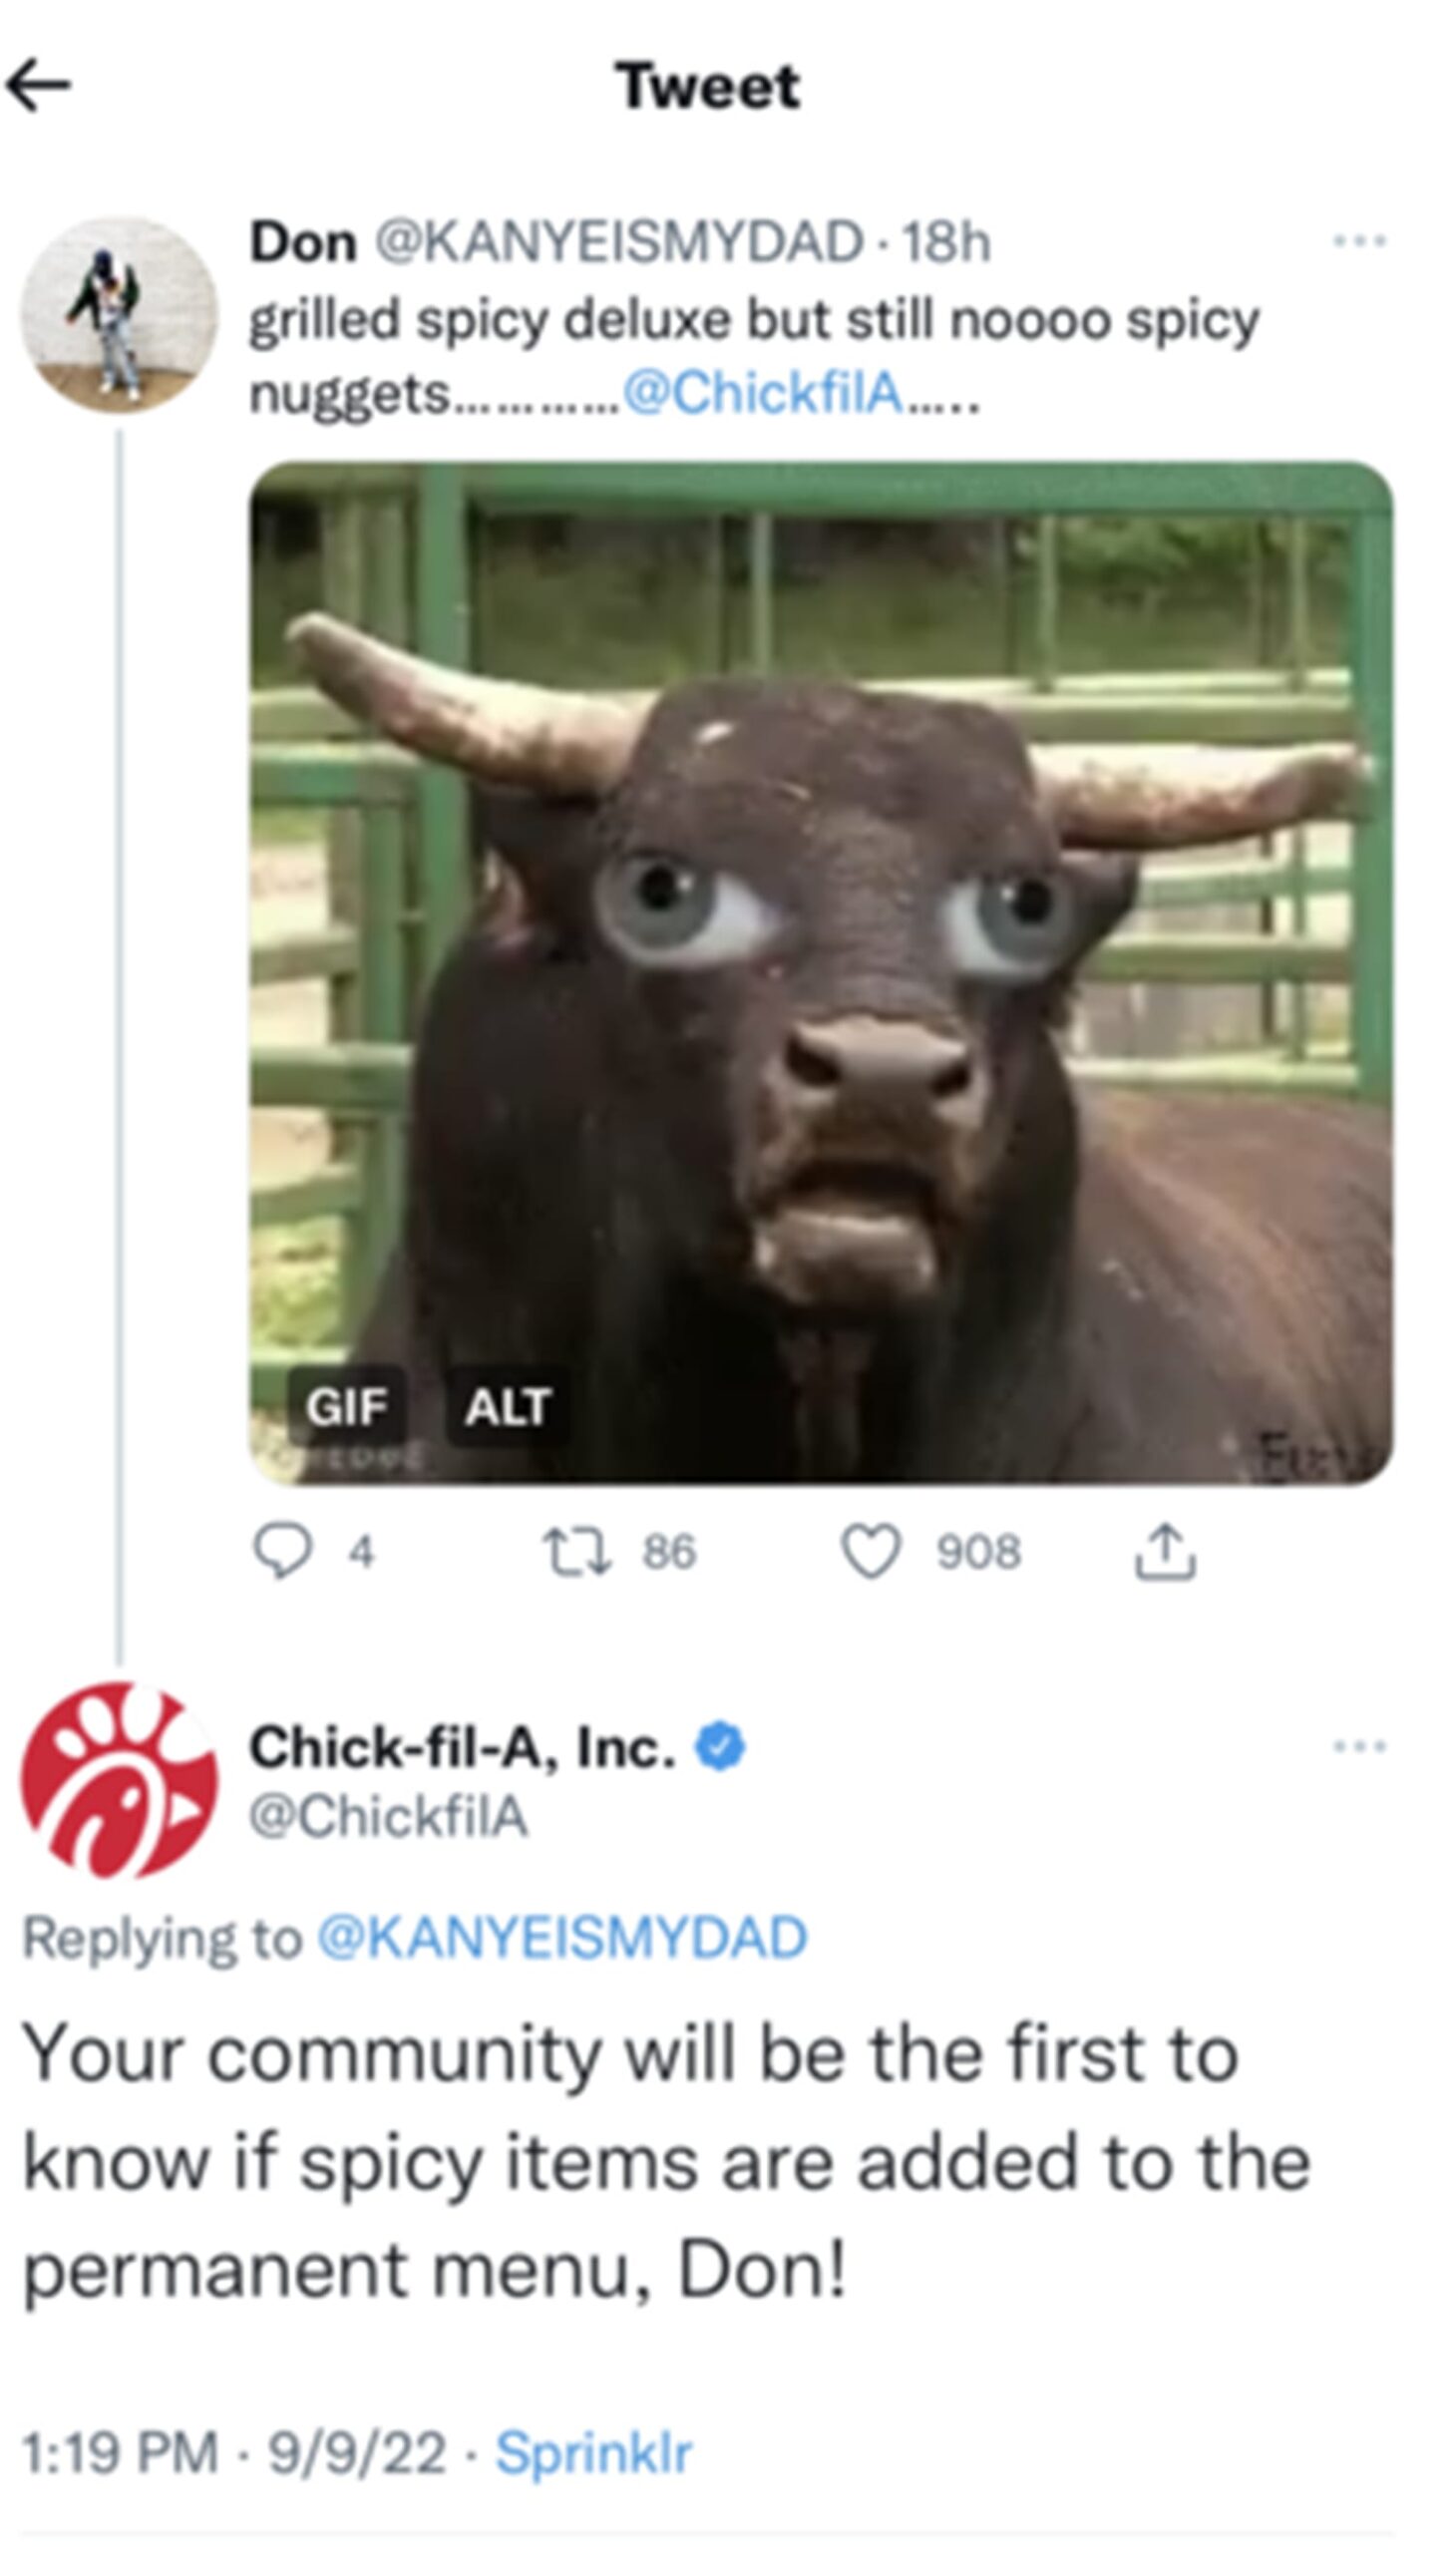 chick fil a tweet todag copy 0d3e25 scaled